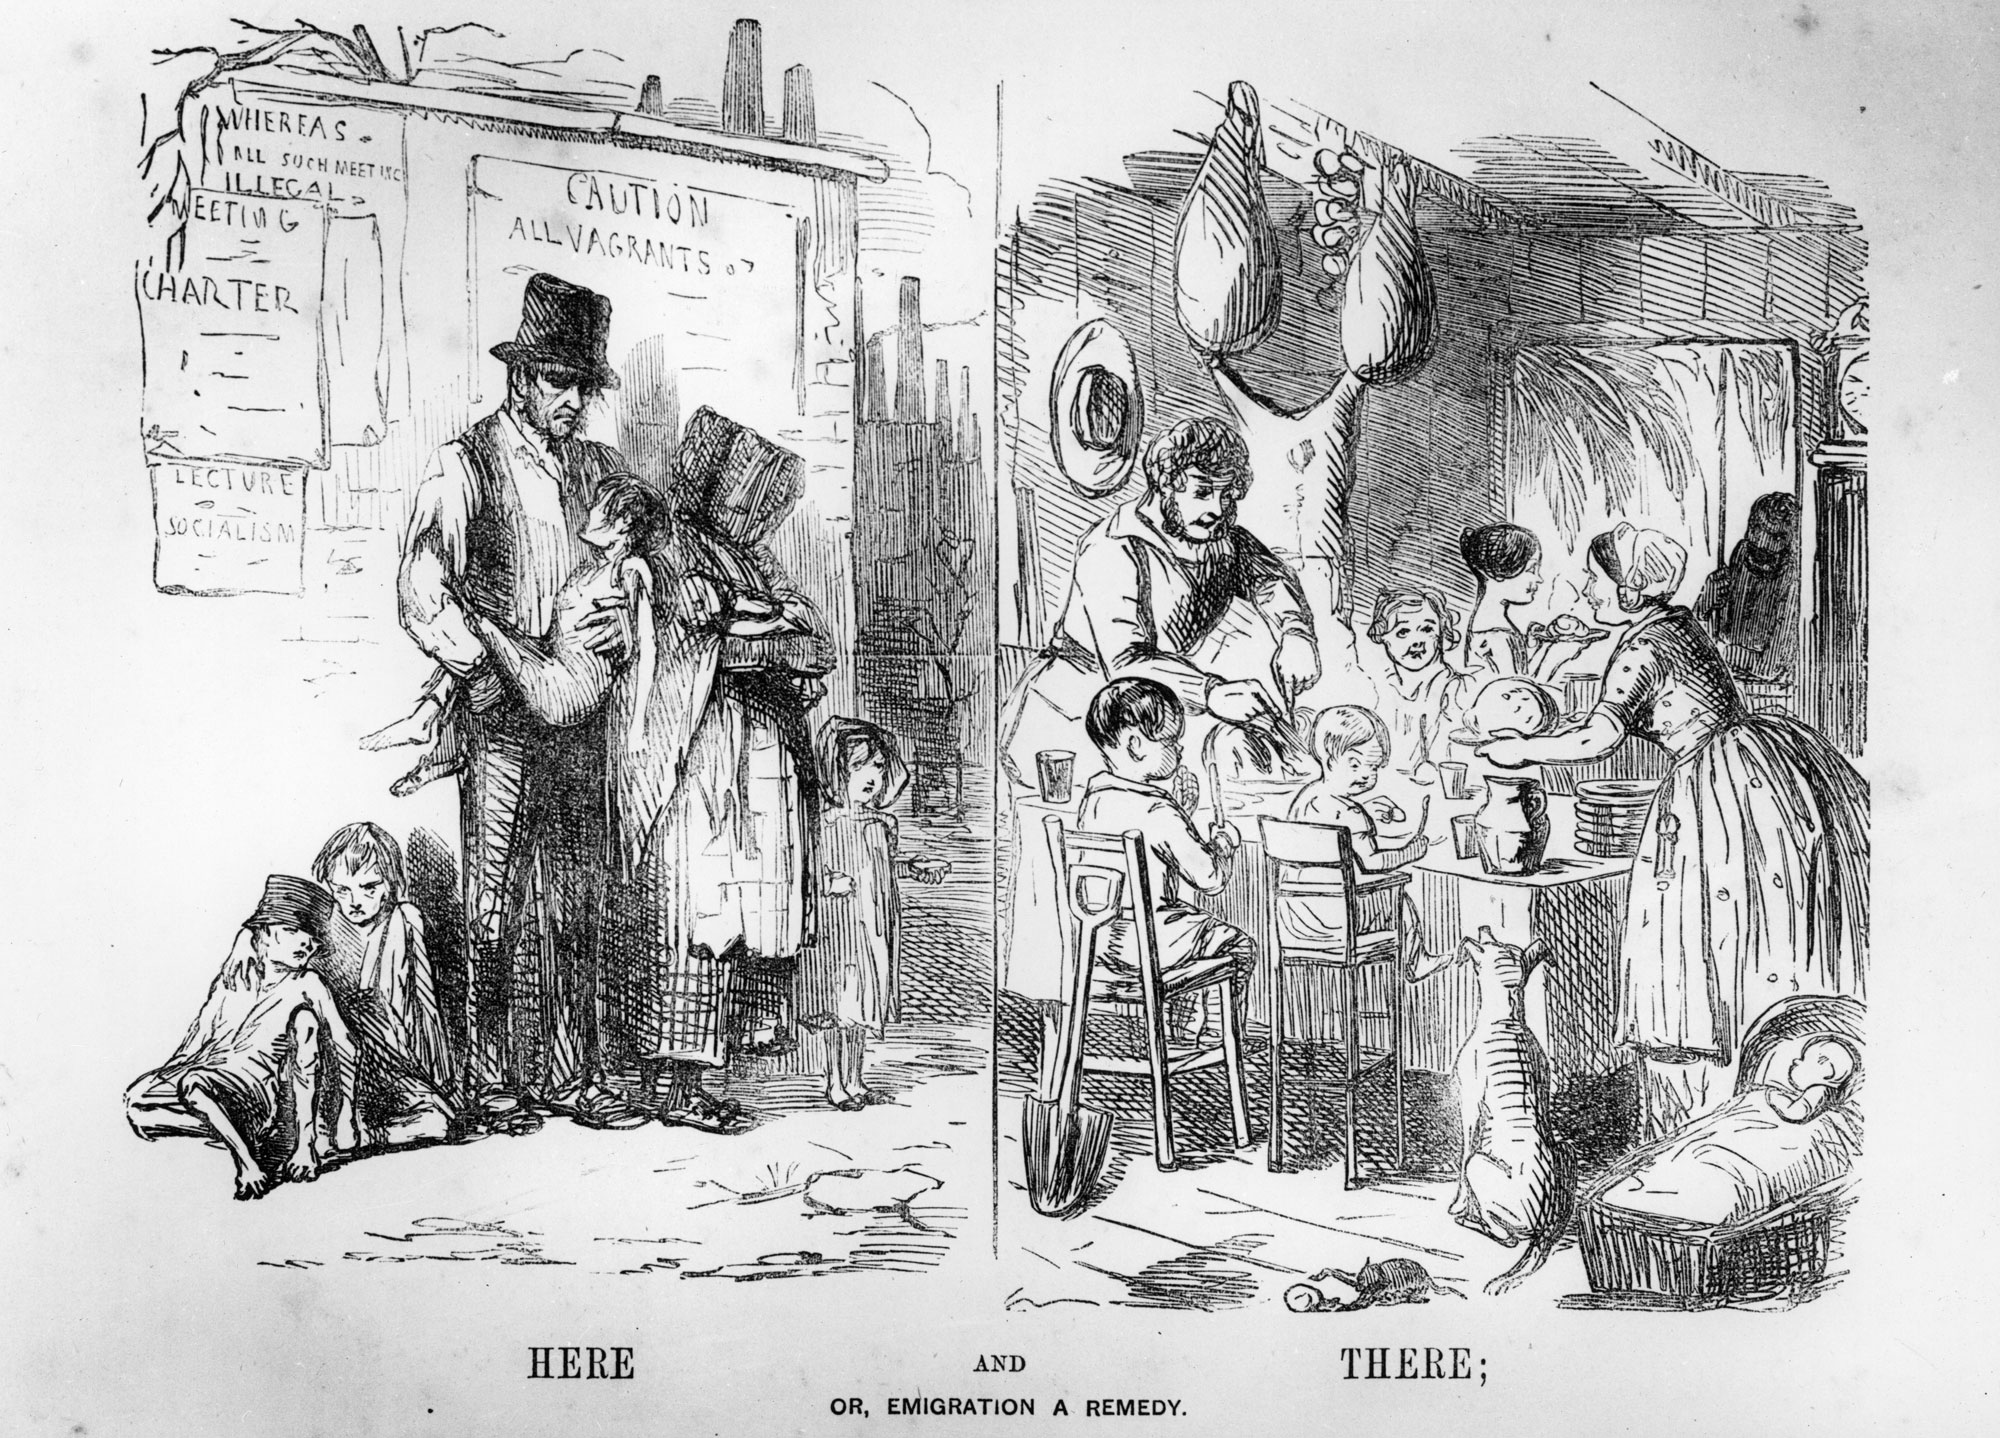 <p>‘Here and there; or emigration a remedy’, published in <em>Punch</em> magazine (London), 8 July 1848</p>
